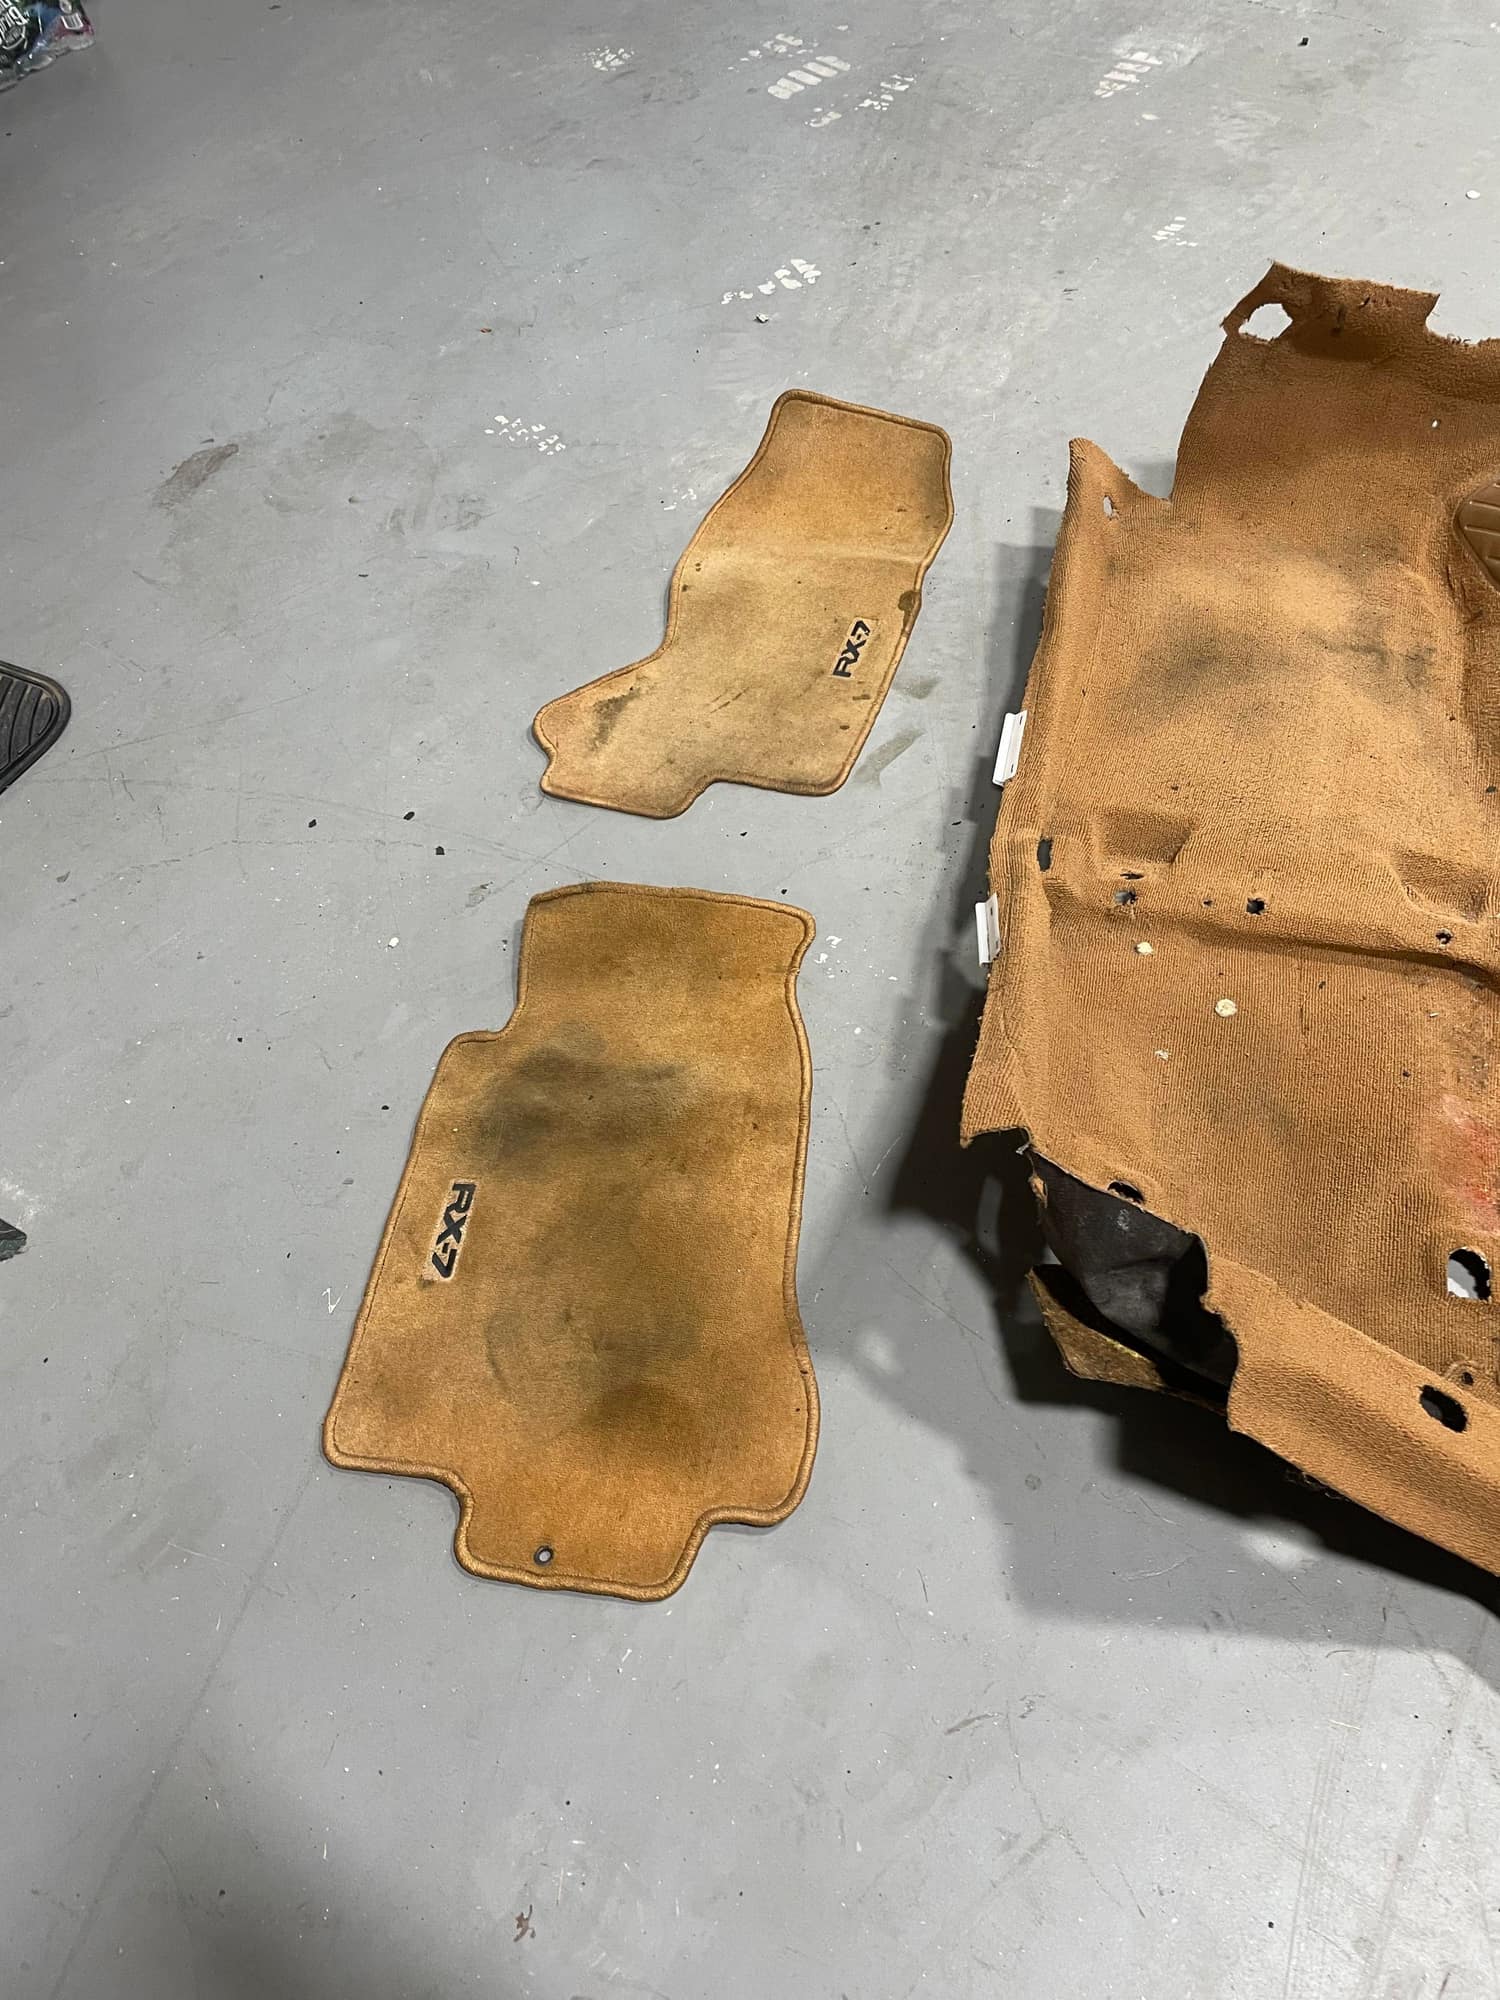 1995 Mazda RX-7 - 95 PEP tan carpet and floor mats - Interior/Upholstery - $850 - Lee, MA 01238, United States